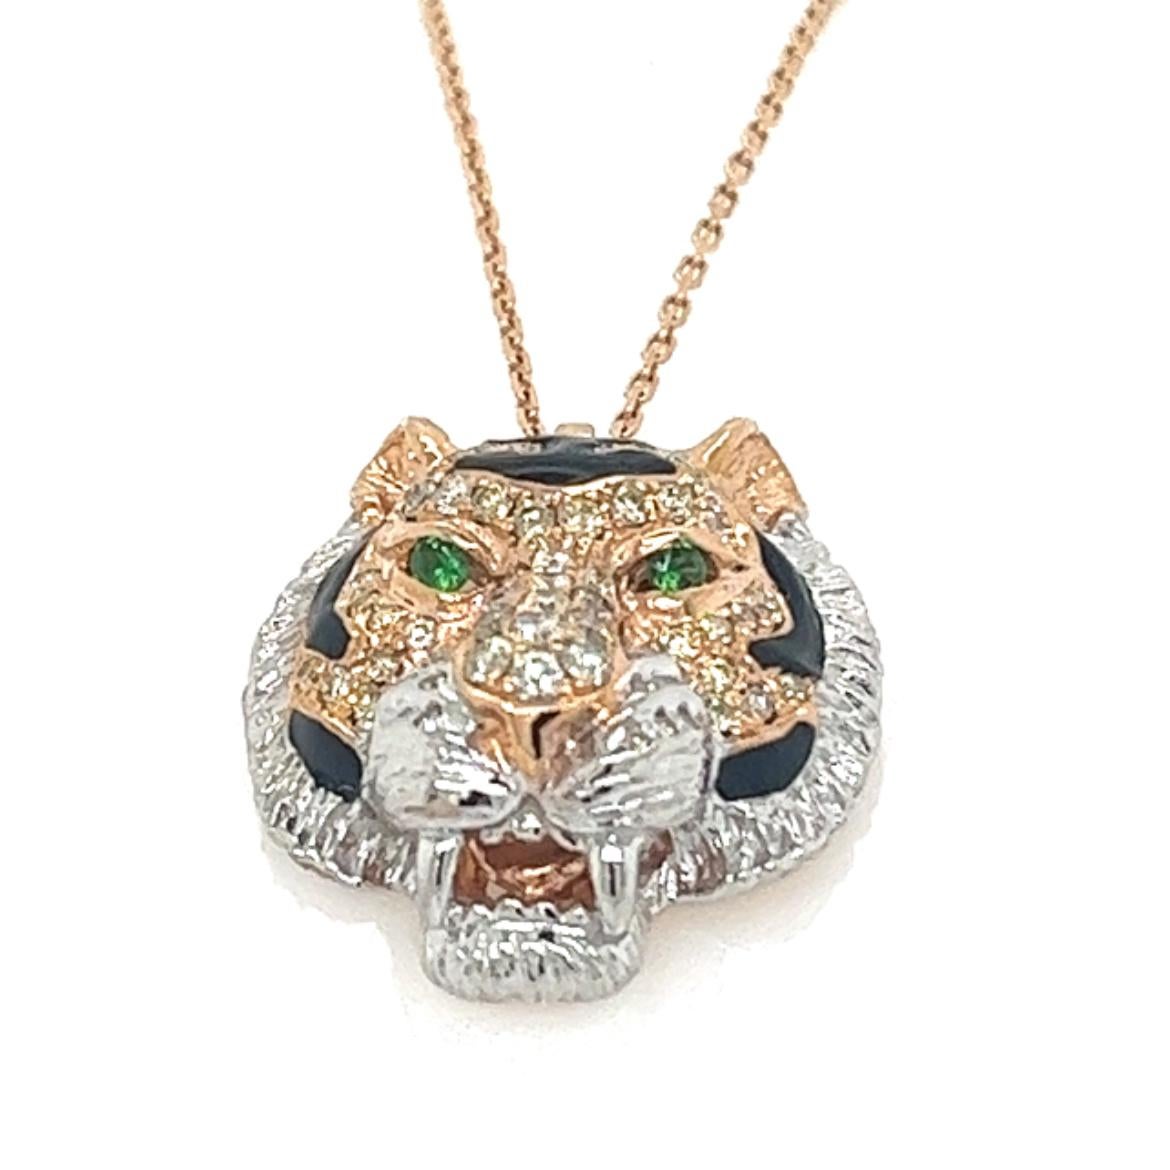 18K Rose Gold Onyx & Ruby Tiger Necklace with Diamonds

69 Diamonds - 0.57 CT
8 Onyx - 0.50 CT
2 Rubies - 0.08 CT
18K Rose Gold - 7.86 GM

Radiant in rose gold, this captivating tiger necklace exudes a regal presence. The fierce tiger's head,